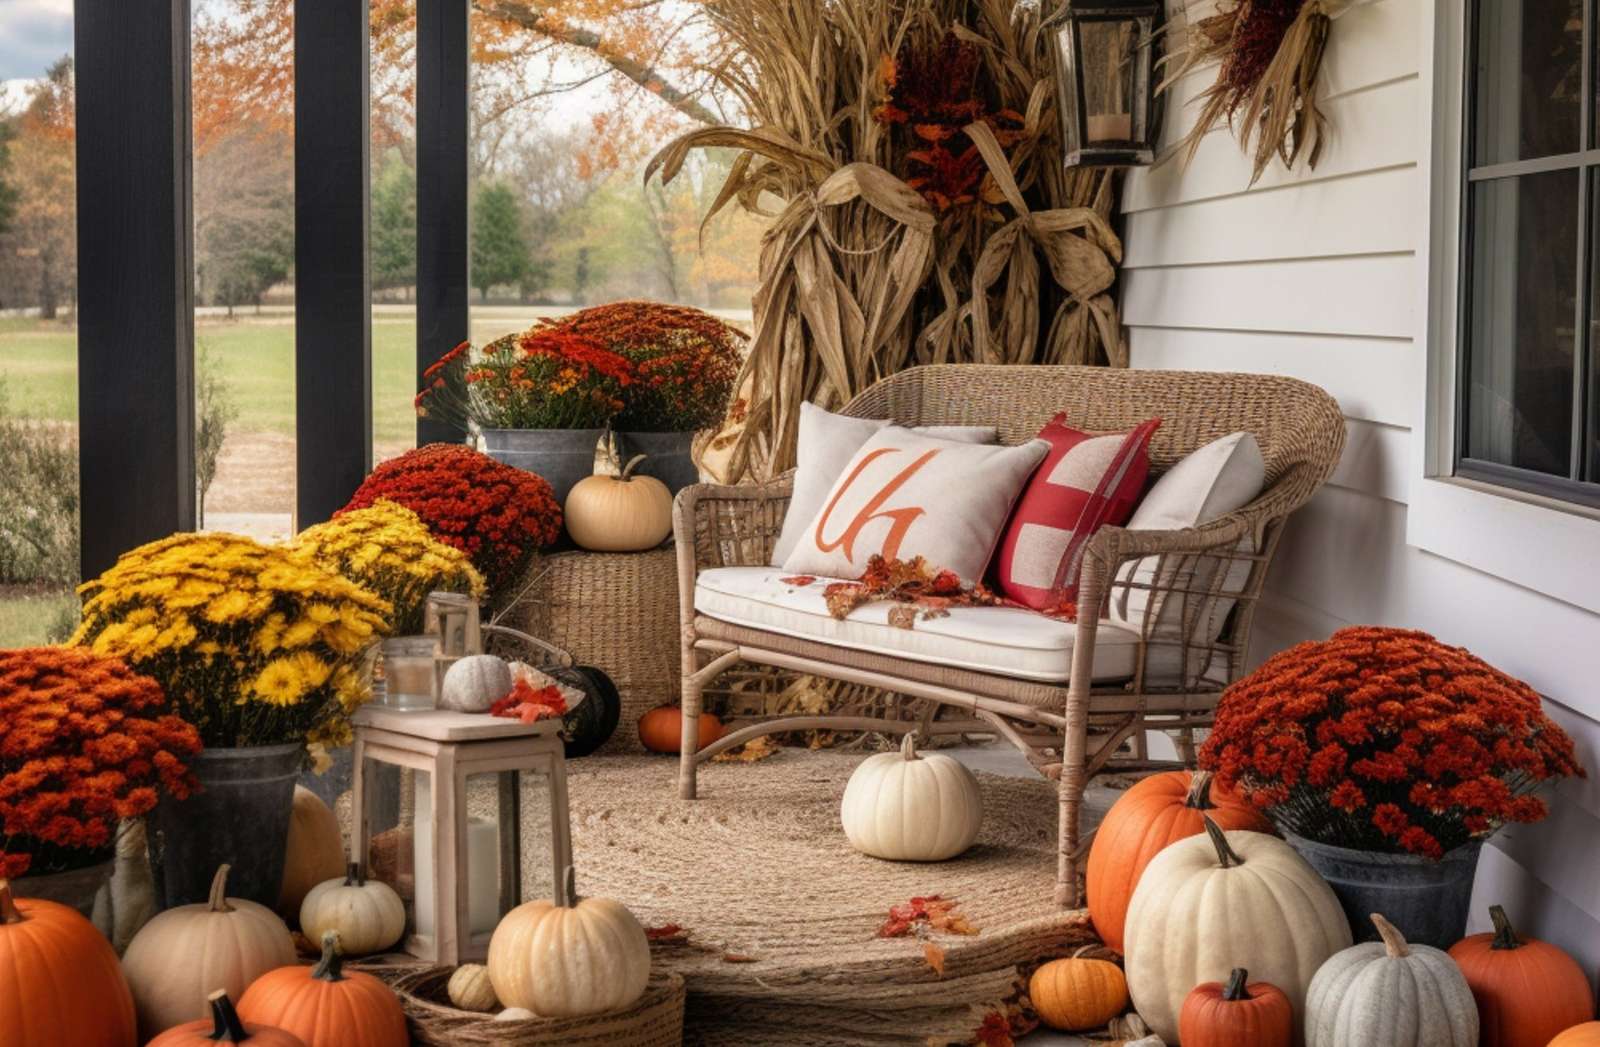 Fall flowers jigsaw puzzle online